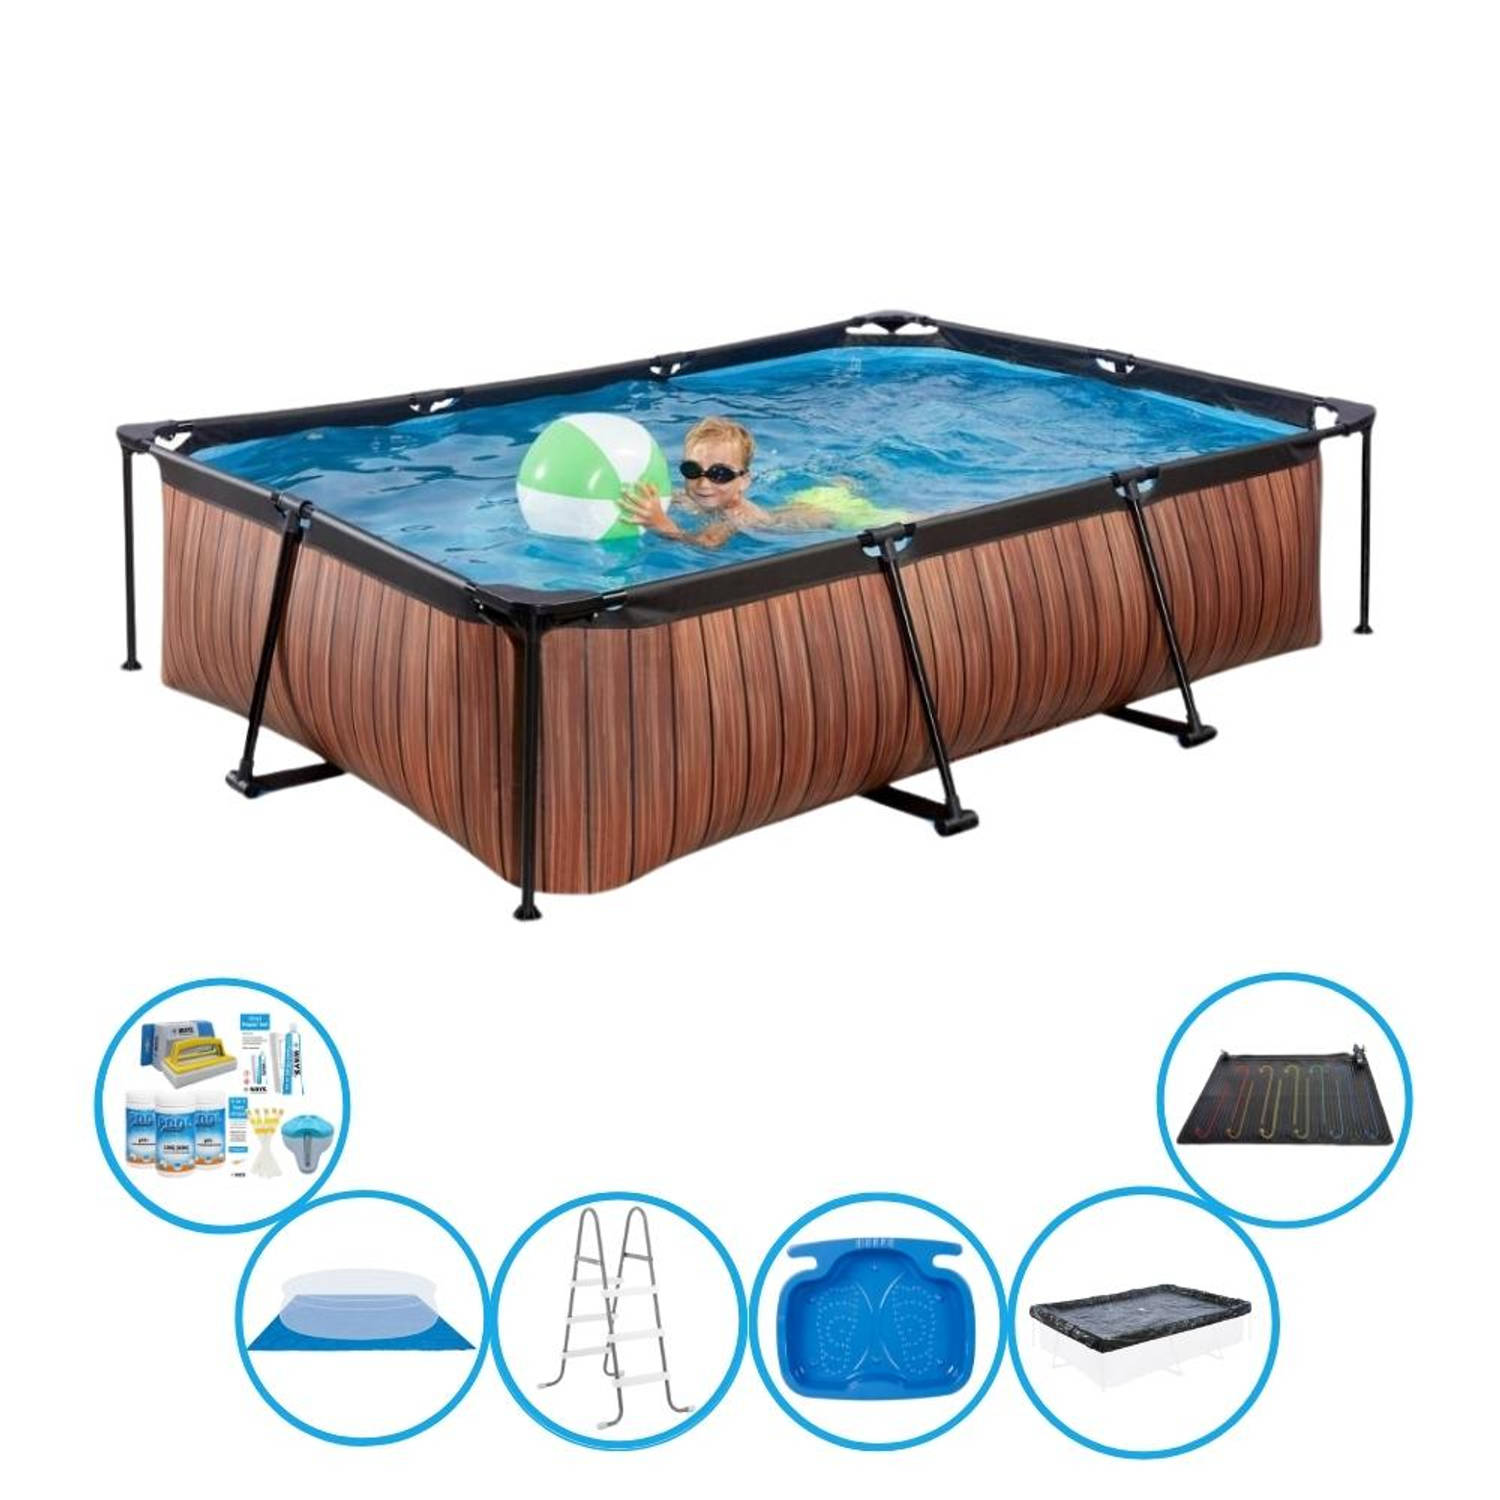 EXIT Toys Exit Zwembad Timber Style - Frame Pool 300x200x65 Cm - Inclusief Toebehoren - Bruin